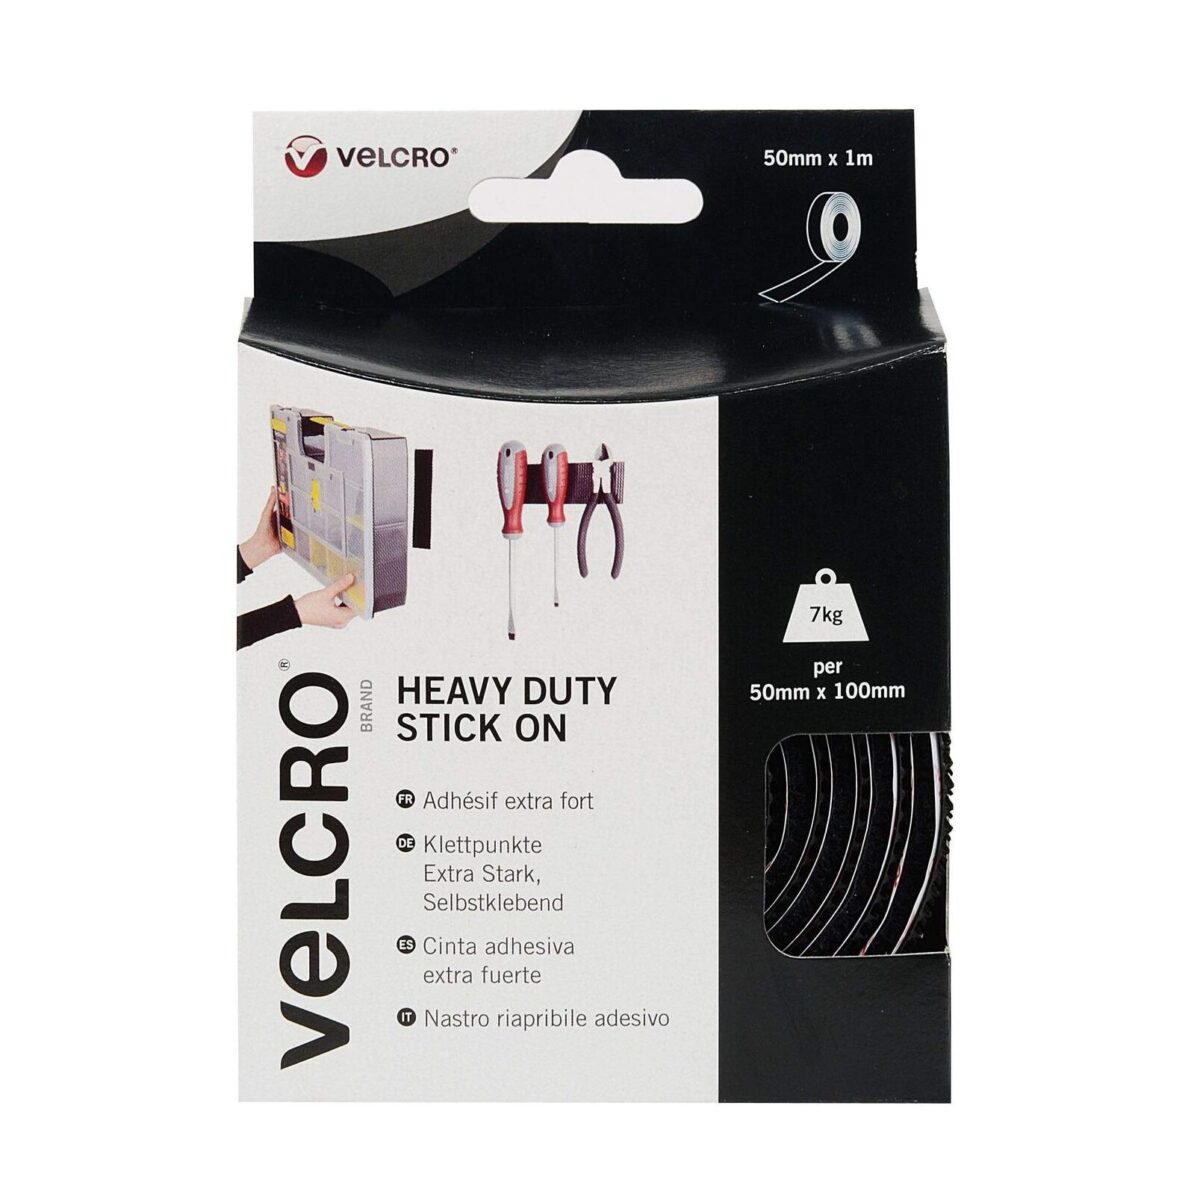 Sew On VELCRO® Brand Tape: Size & Colour Options